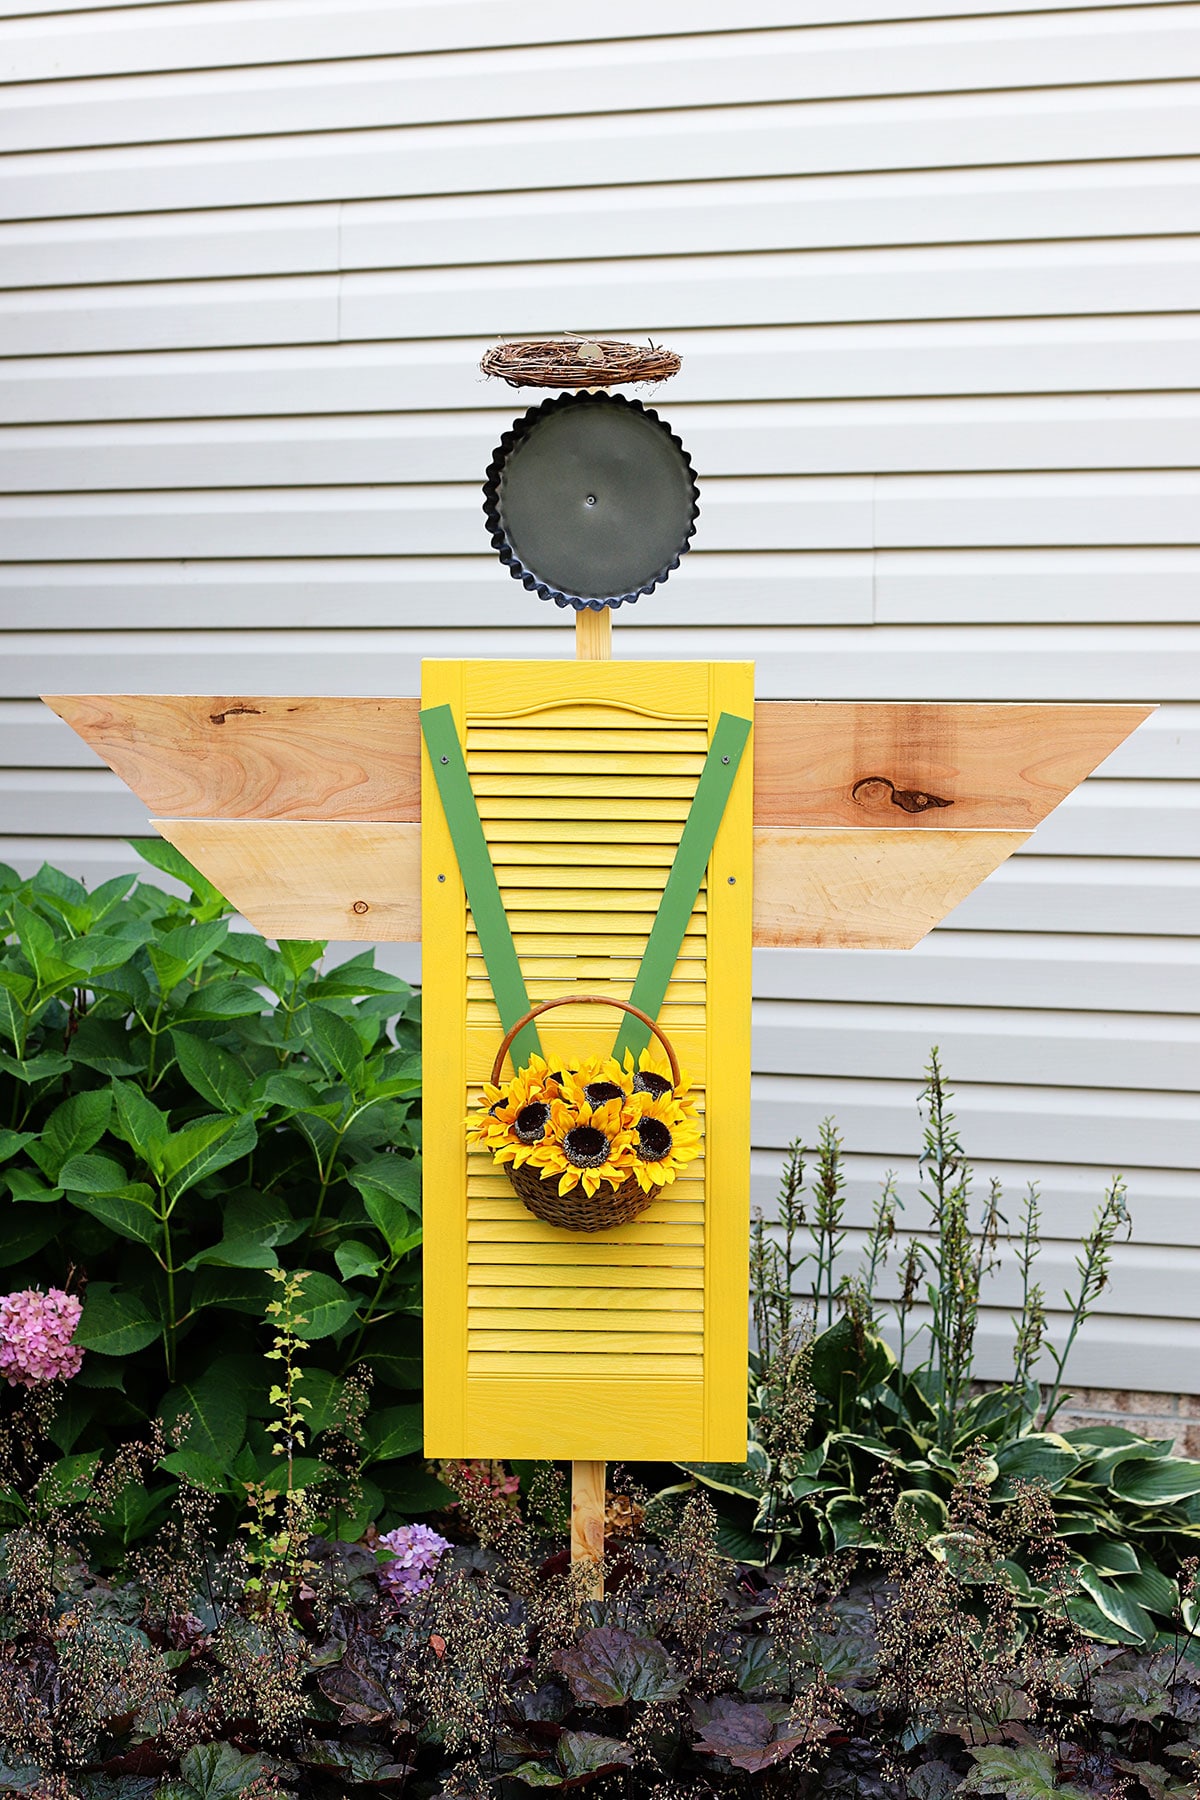 A shutter angel for the garden made with a repurposed shutter from the thrift store. The angel is holding a basket of sunflowers and wearing a halo made from a grapevine wreath.